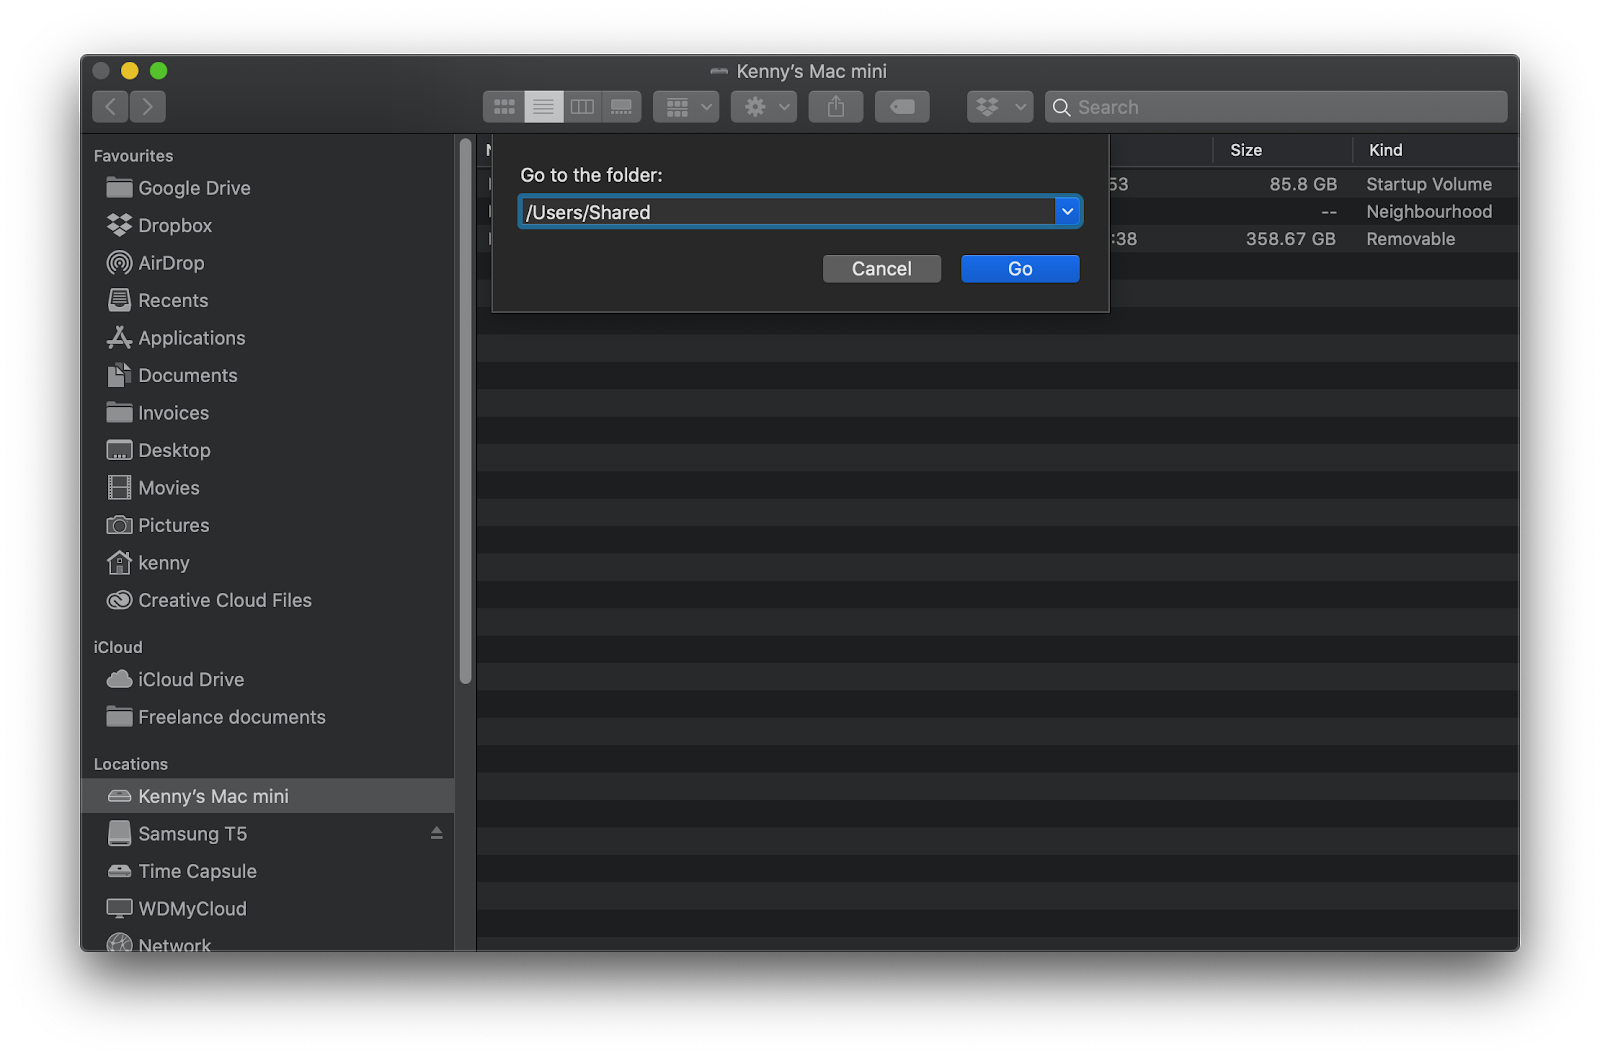 clean up pro for mac